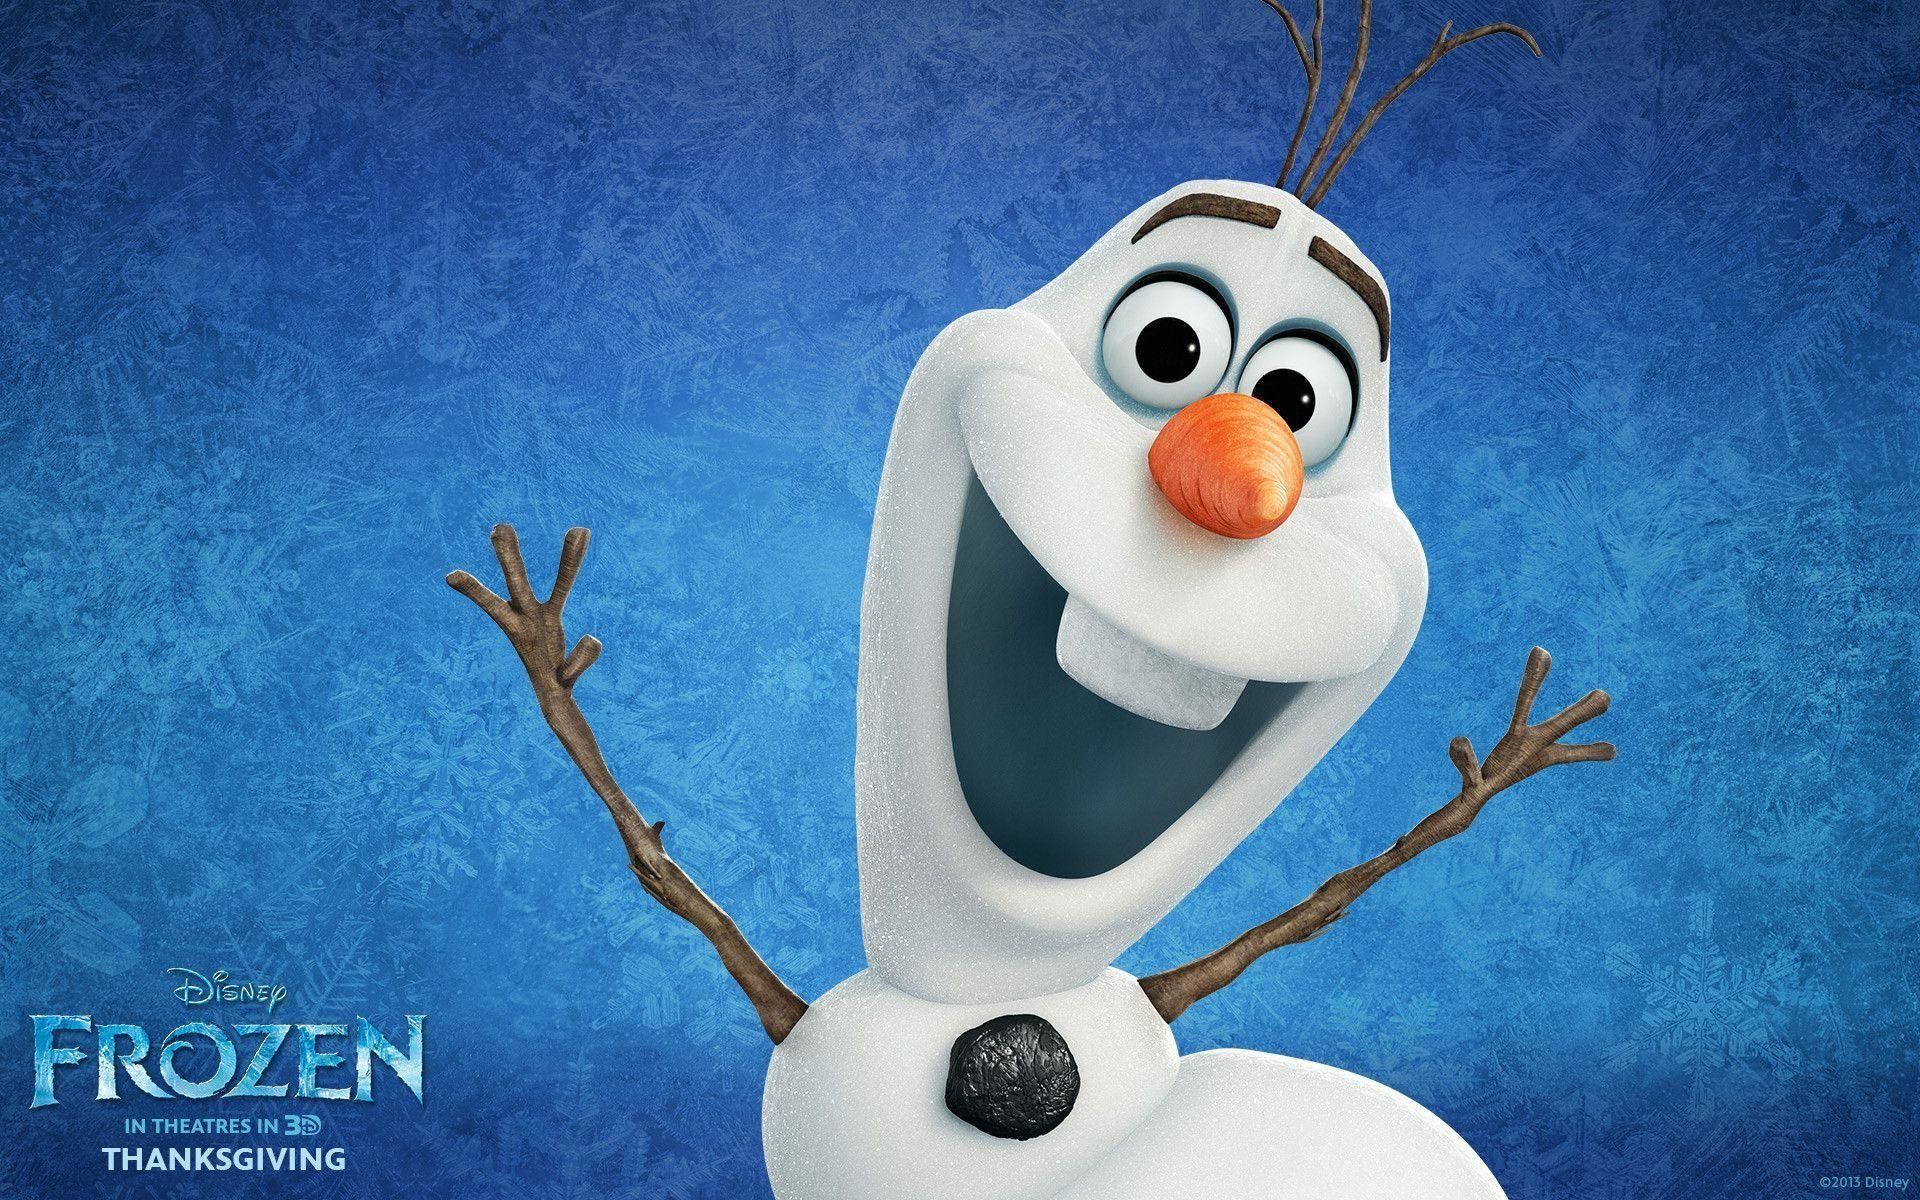 Disney At Home With Olaf Wallpapers